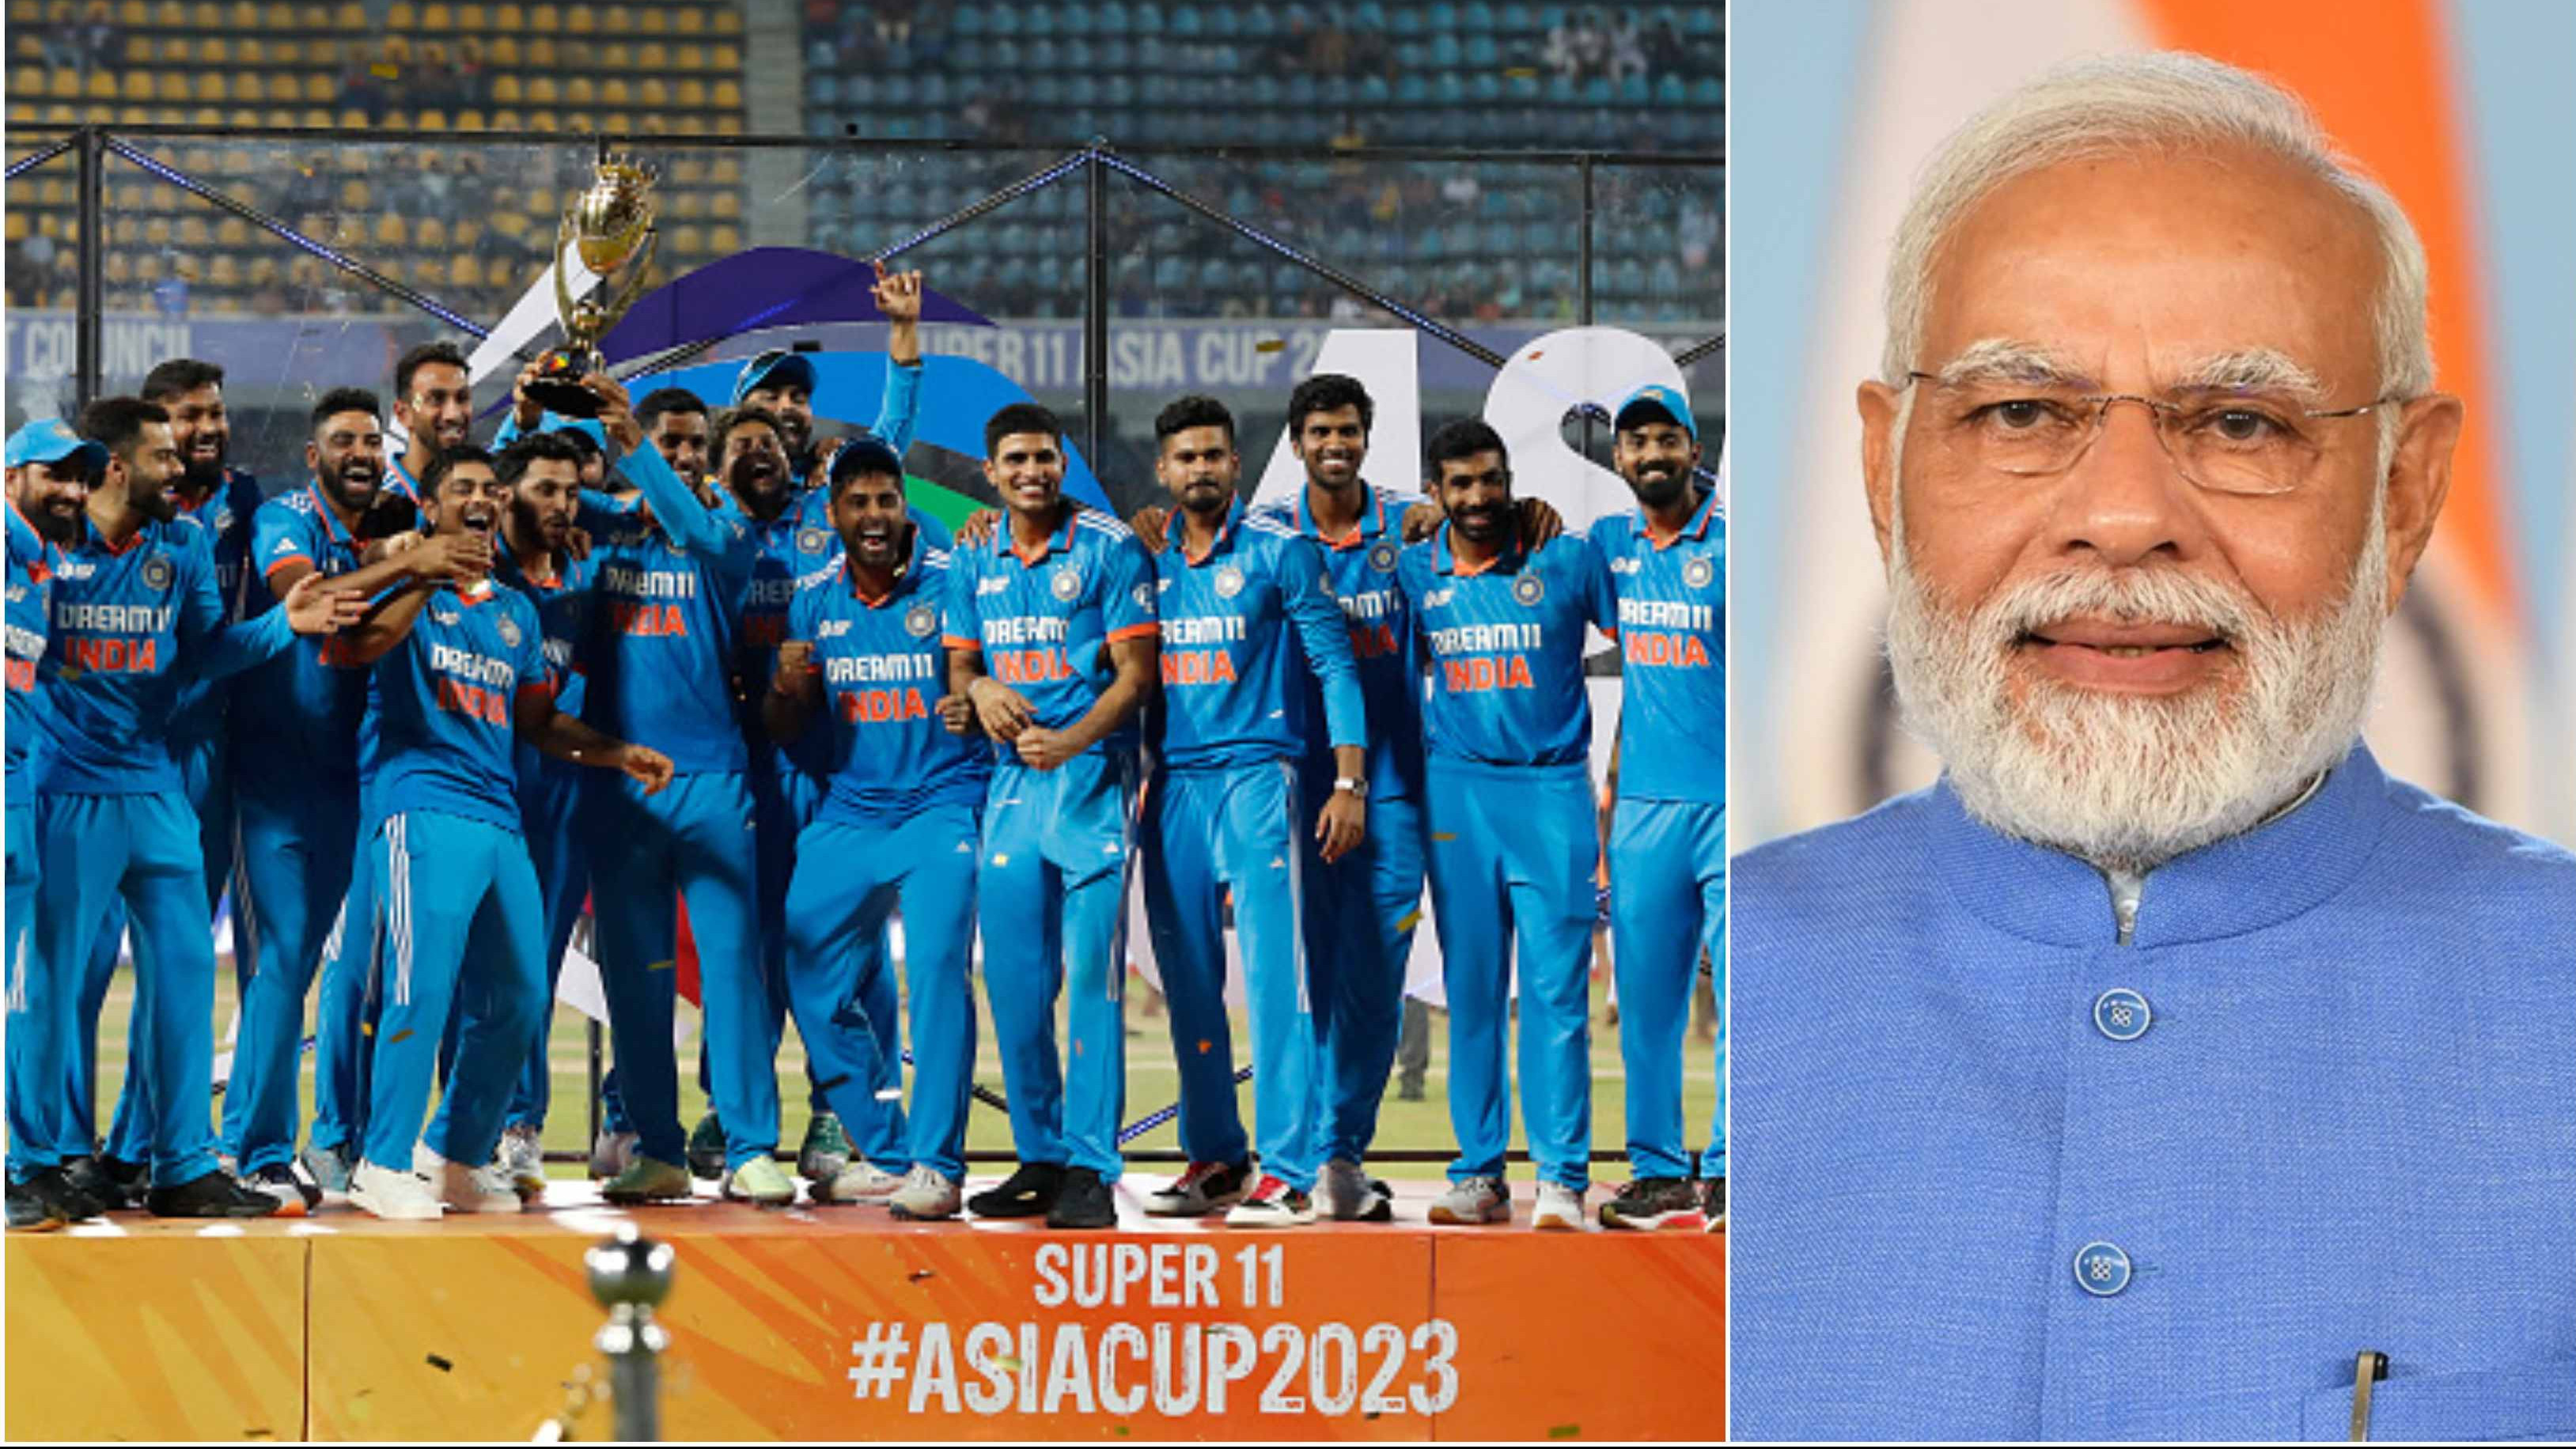 Asia Cup 2023: “Well played Team India,” PM Modi congratulates Rohit Sharma and his men on Asia Cup title win